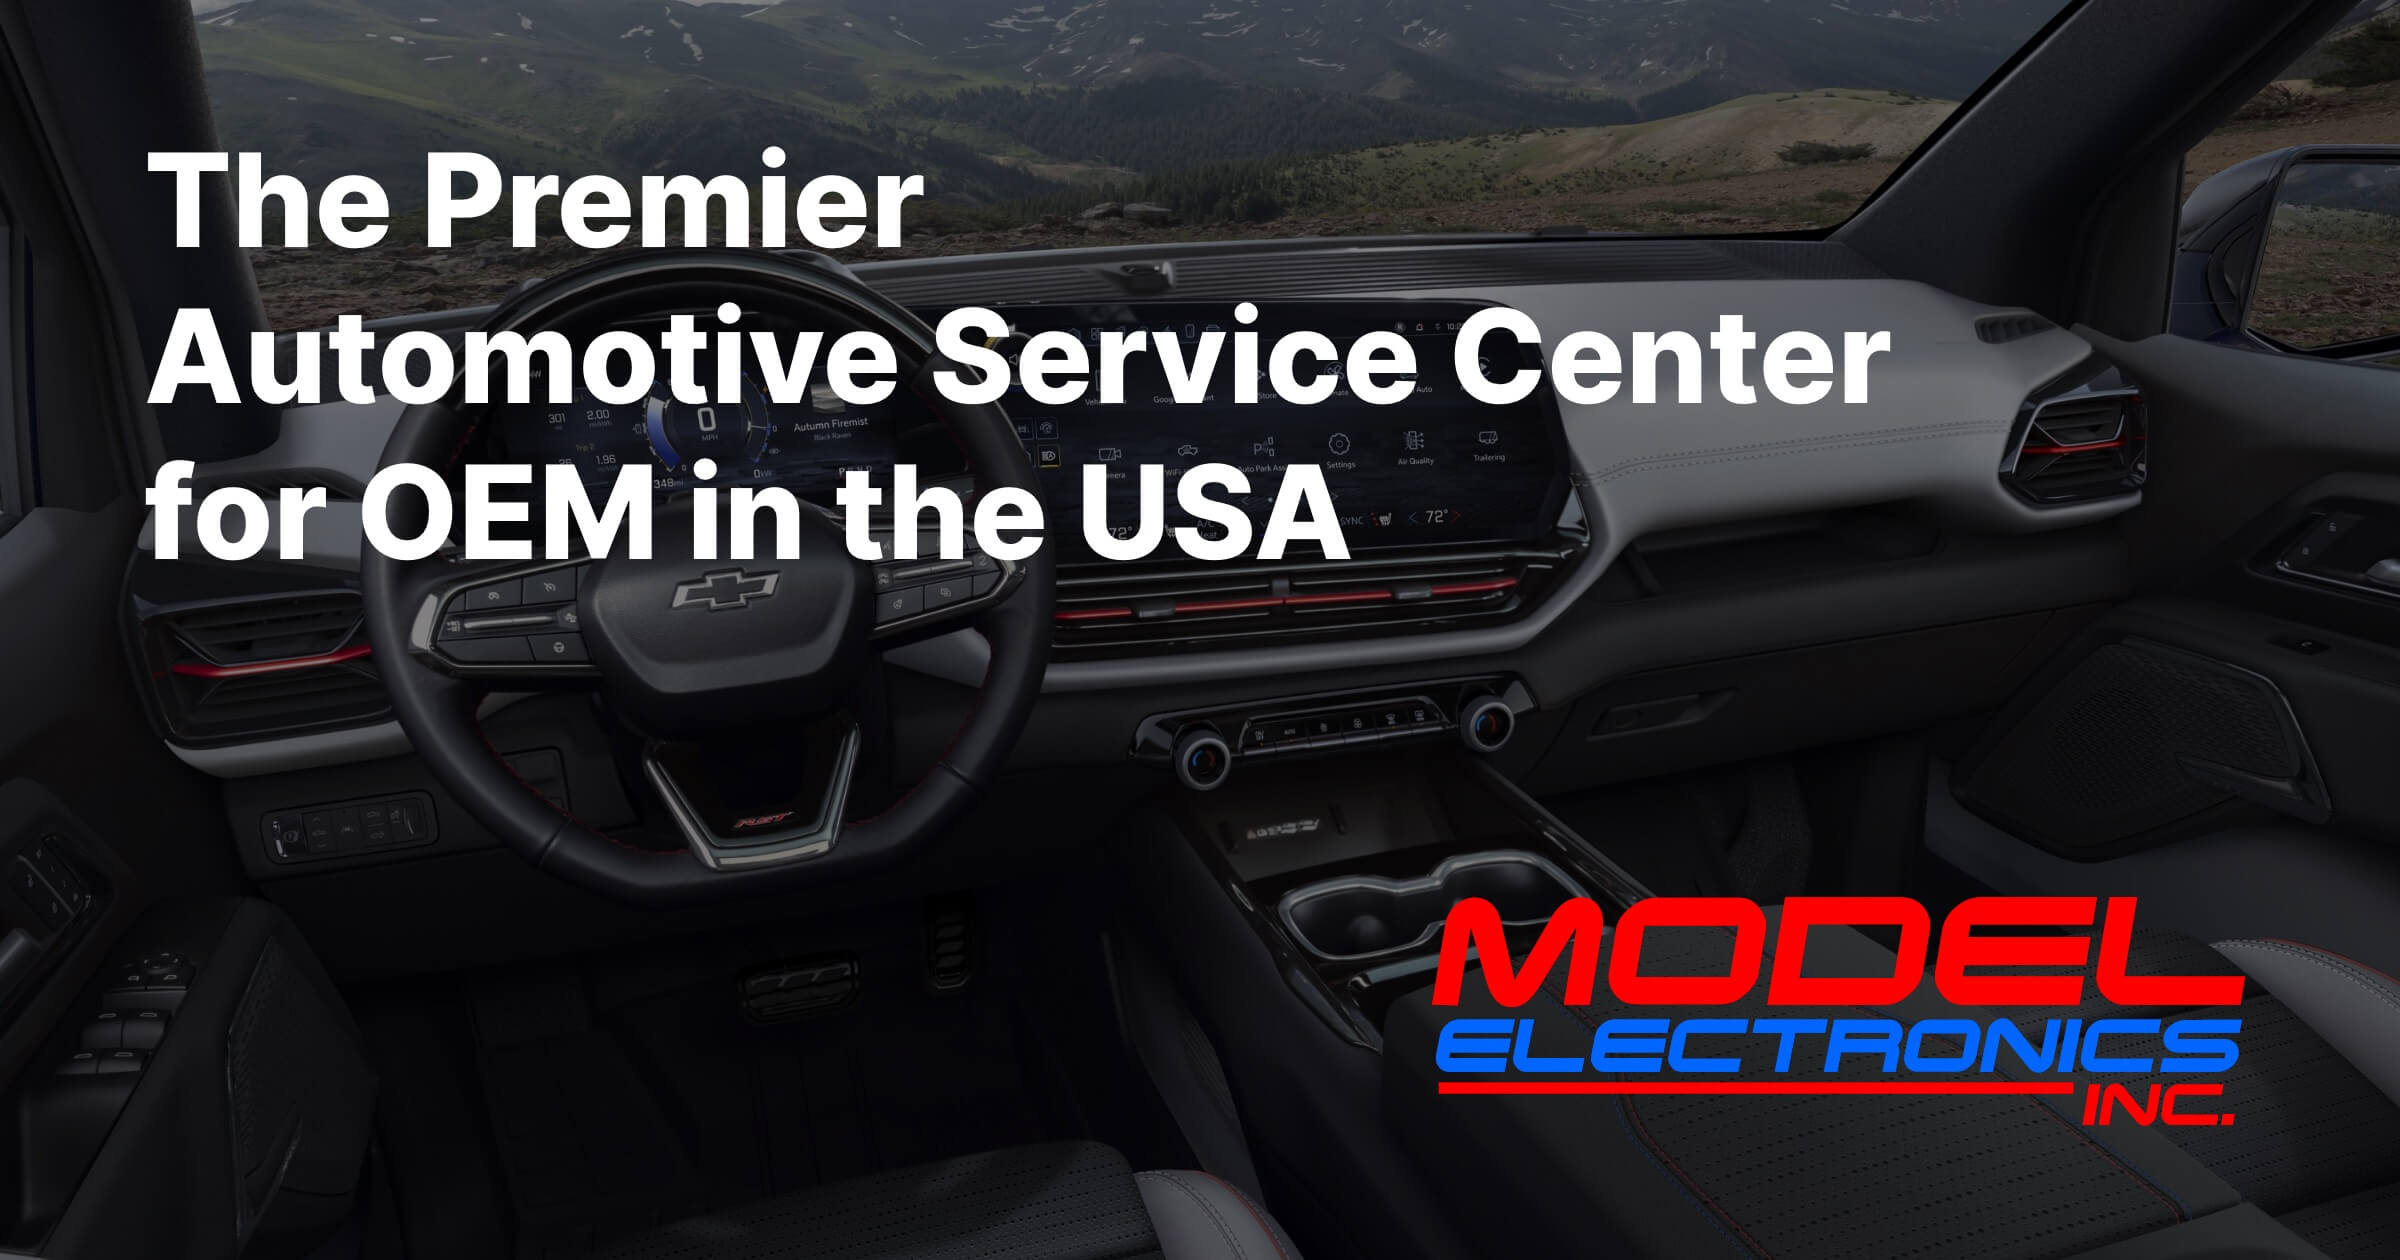 The Premier Automotive Service Center for OEM in the USA